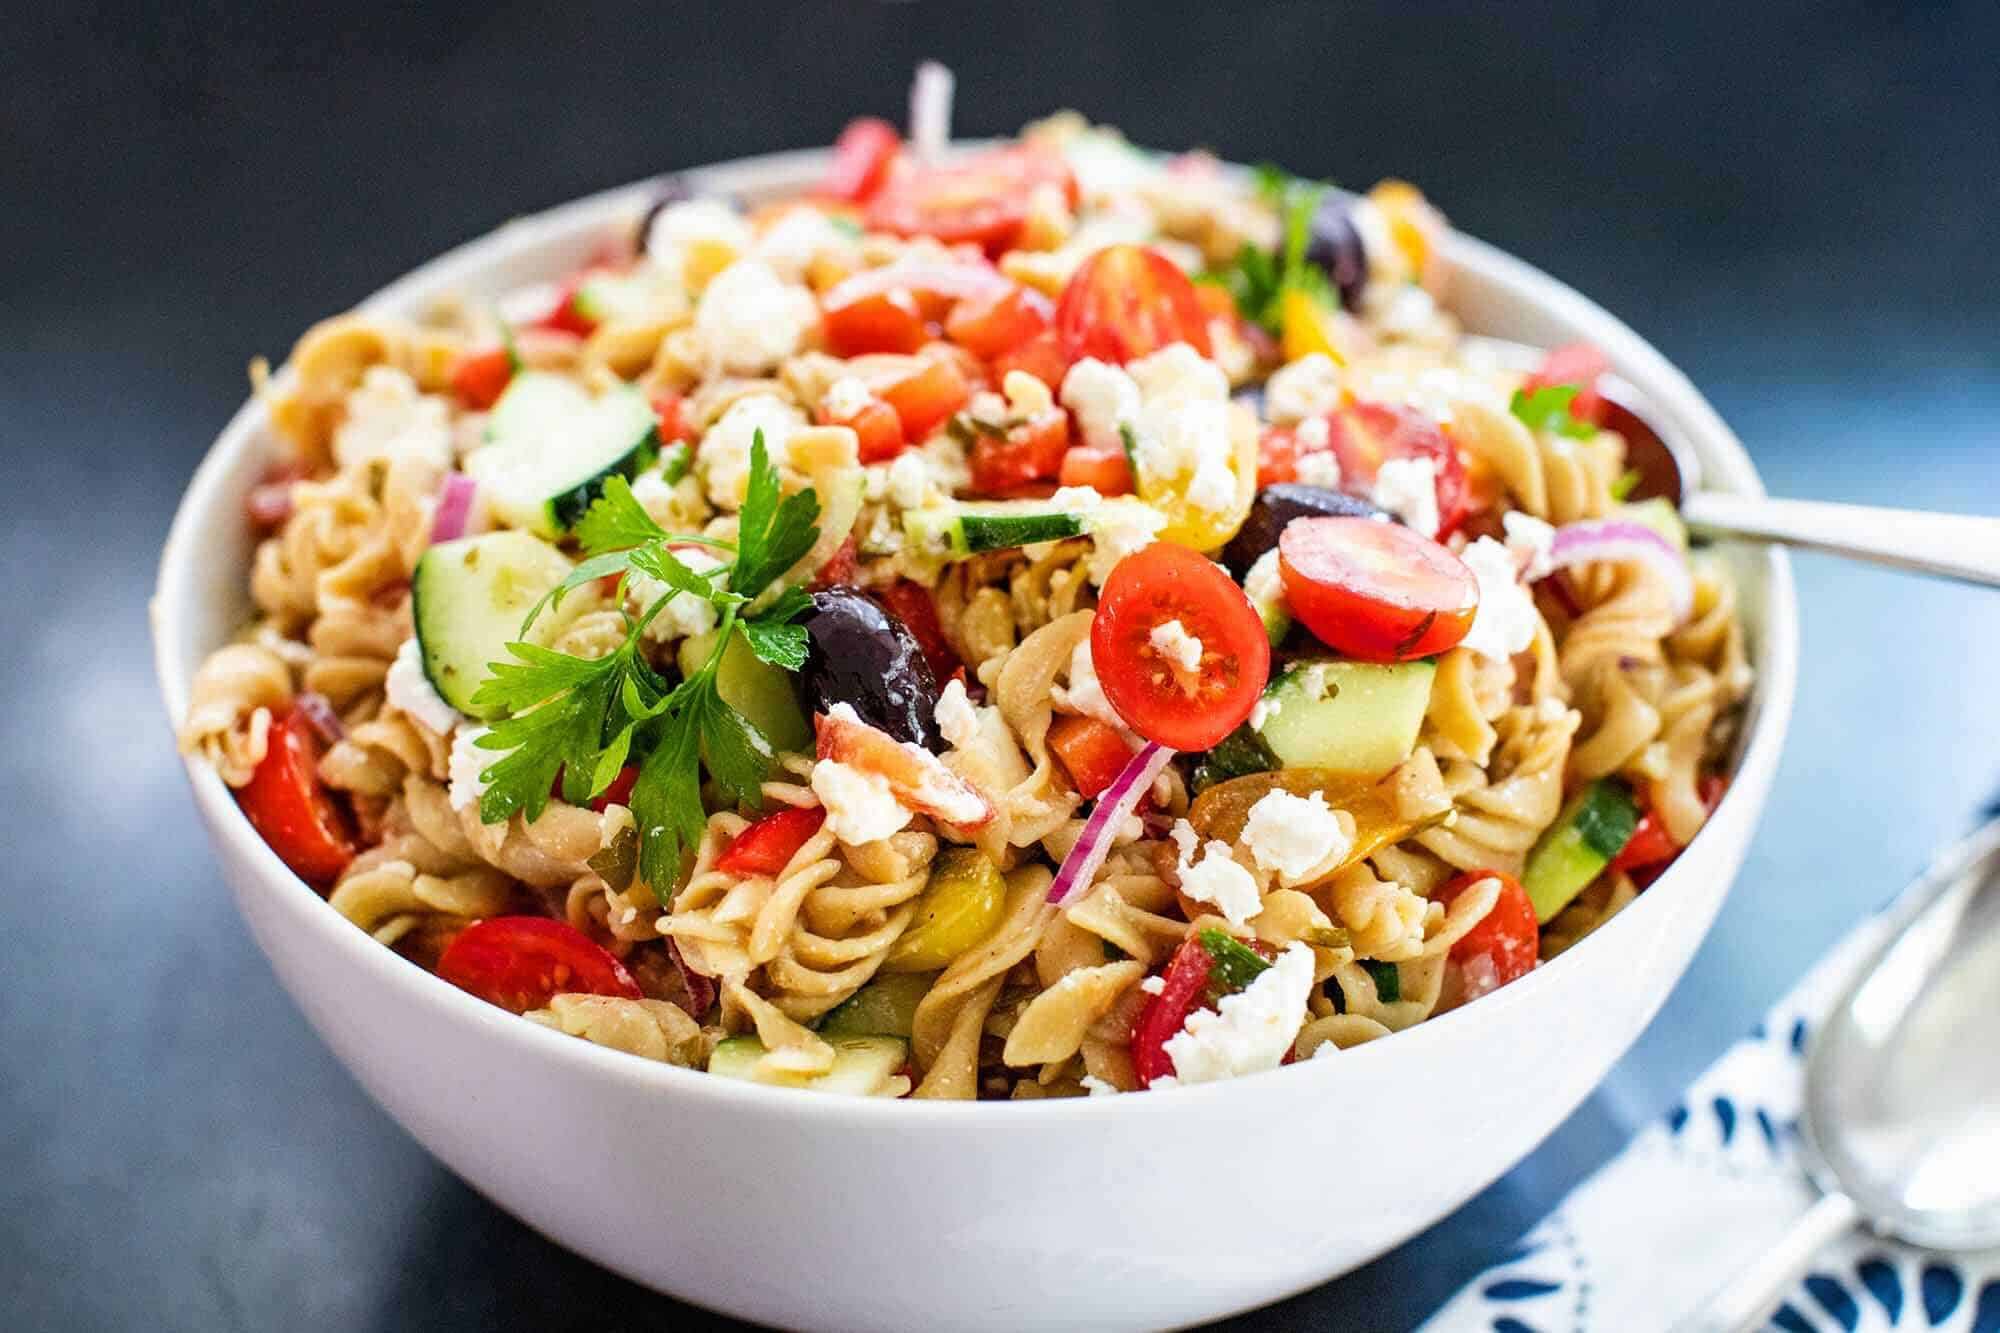 20 Easy Cold Pasta Salads For Summer Cookouts